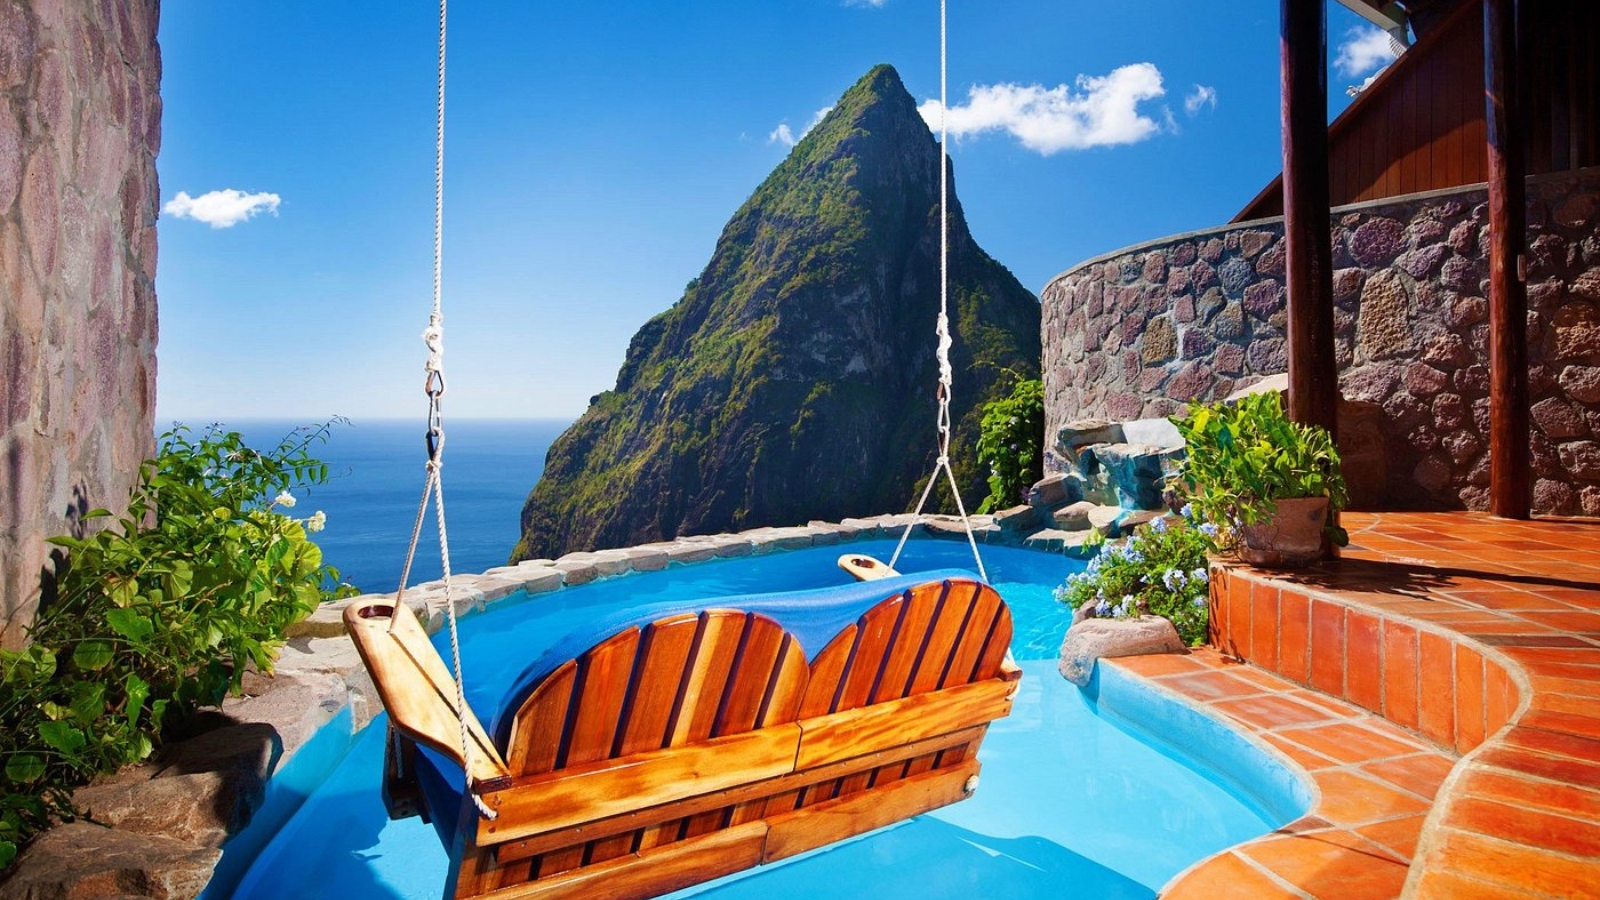 <p>Perched on a volcanic ridge 1,000 feet above the Caribbean Sea, Ladera Resort offers open-air suites with breathtaking views of St. Lucia’s iconic Pitons. Each suite features a private plunge pool and an open fourth wall, allowing guests to fully immerse themselves in the island’s natural beauty. </p> <p>Established in 1992 on a former cocoa plantation, the resort blends historical charm with luxurious, eco-friendly design using locally sourced materials. With its award-winning Dasheene Restaurant and a focus on sustainability, Ladera Resort provides a unique and extravagant experience, perfect for travelers seeking a luxurious connection with nature.</p>